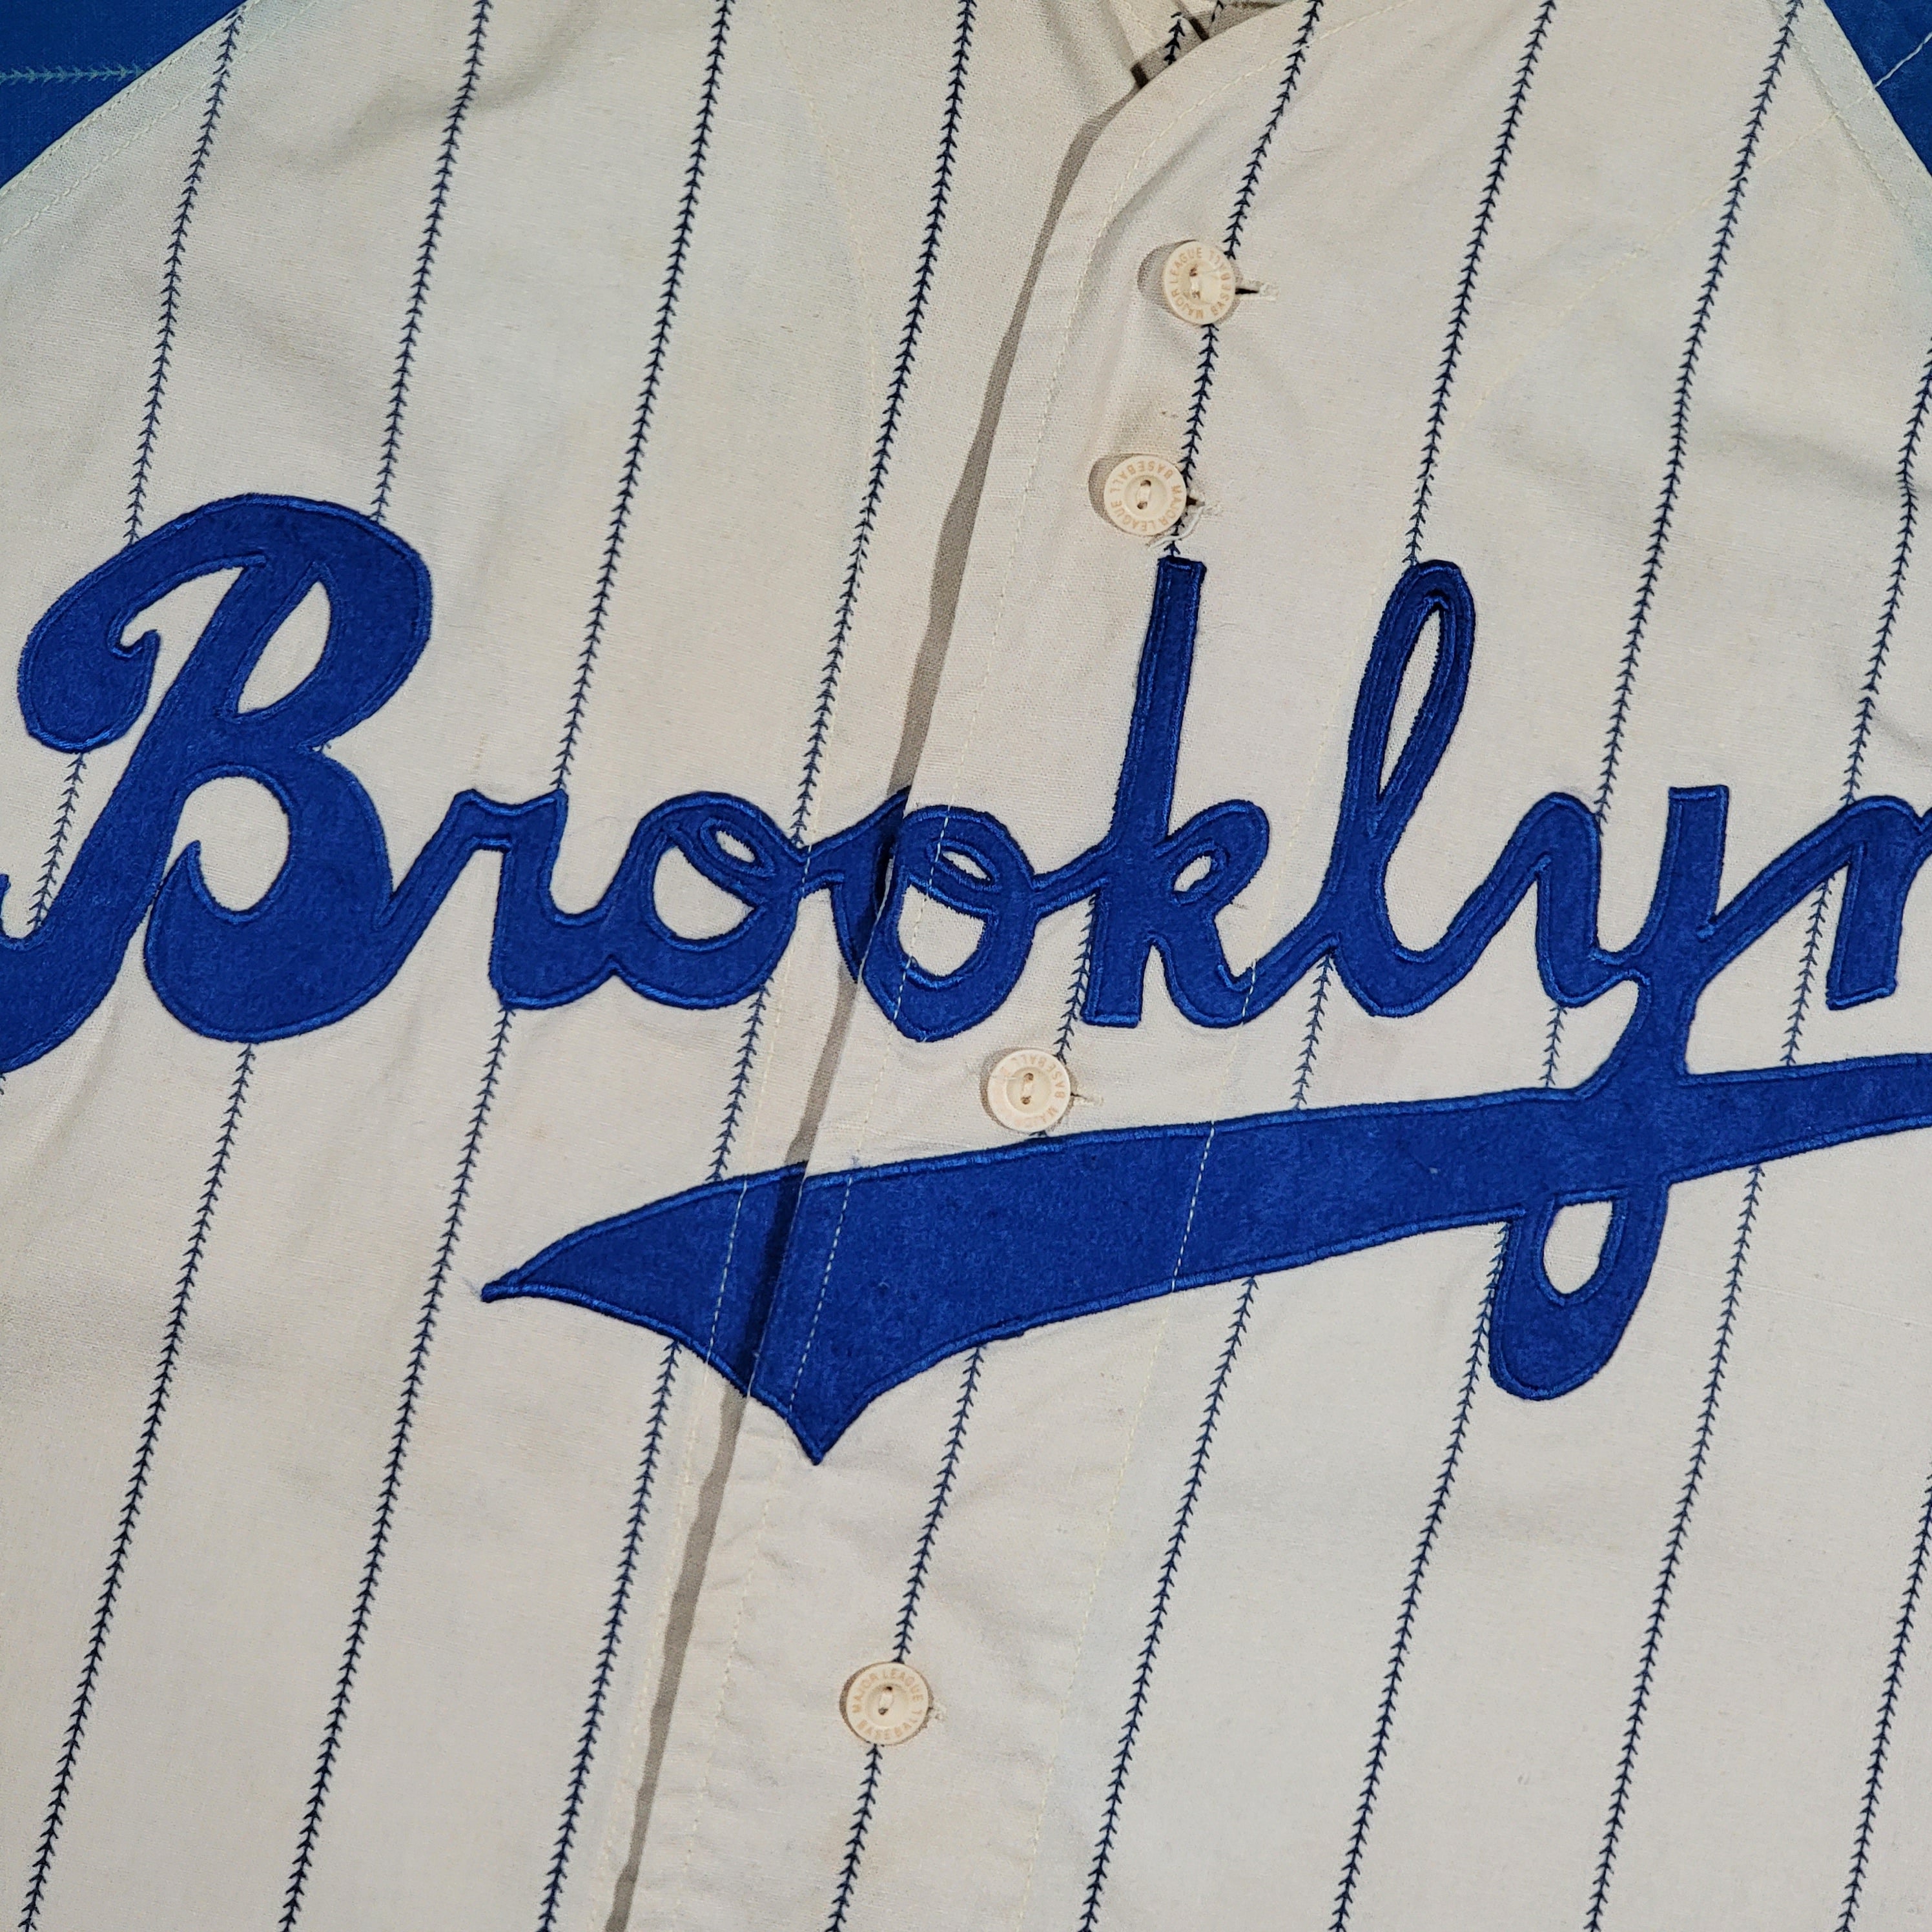 Vintage 90s Brooklyn Dodgers Jackie Robinson Baseball Jersey By Mirage  Coopers | Shop THRILLING